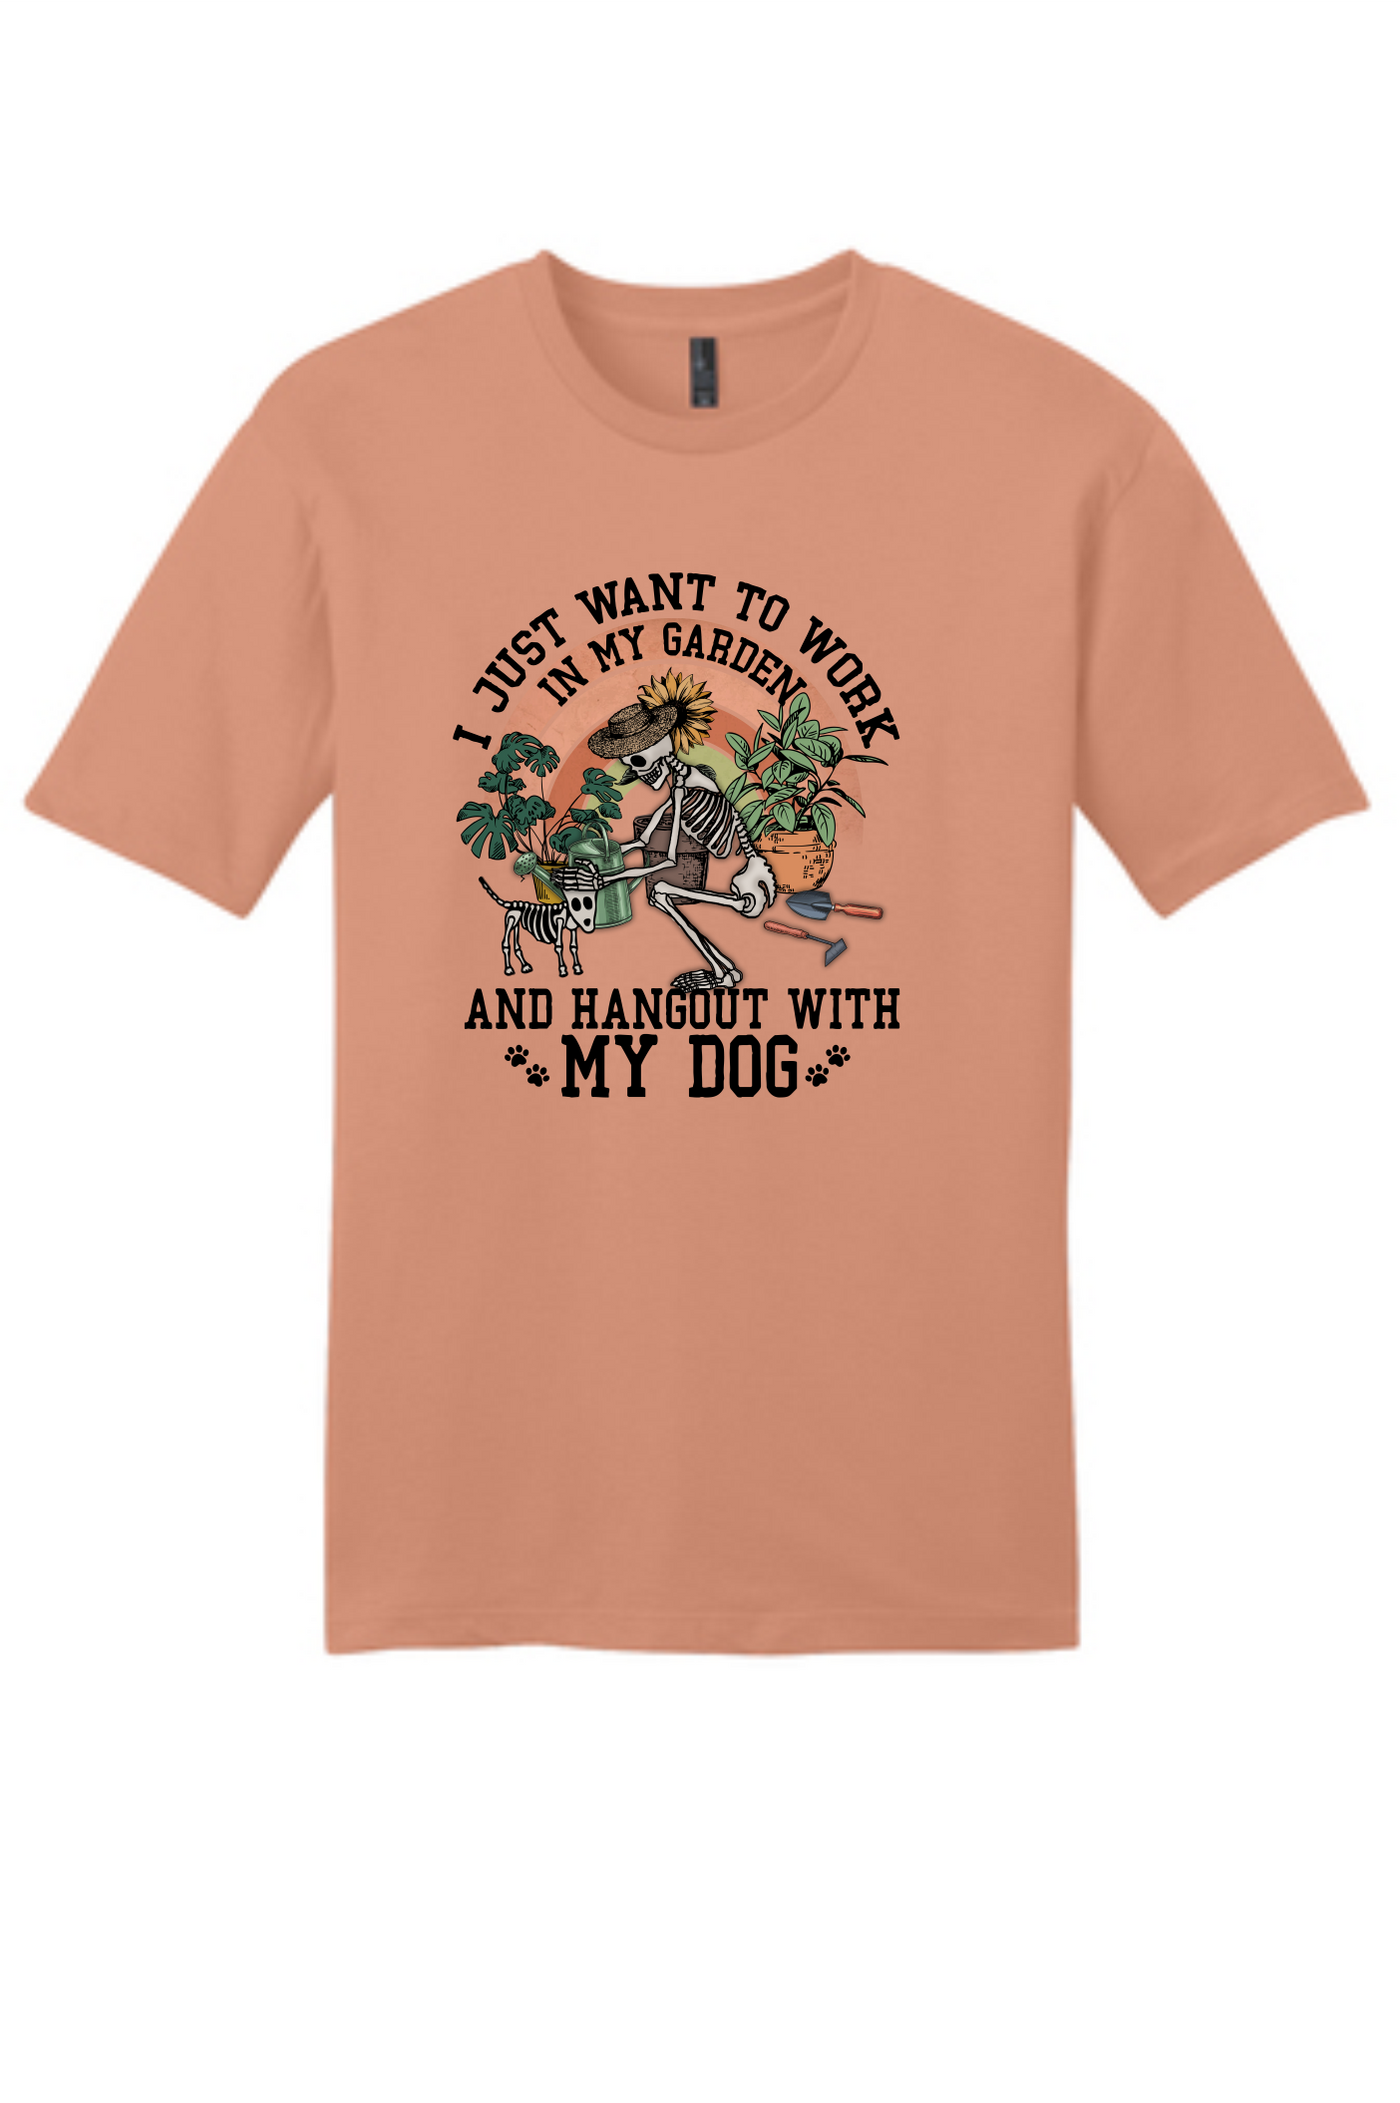 I Just Want To Garden & Hang Out With My Dog Short Sleeve T-shirt